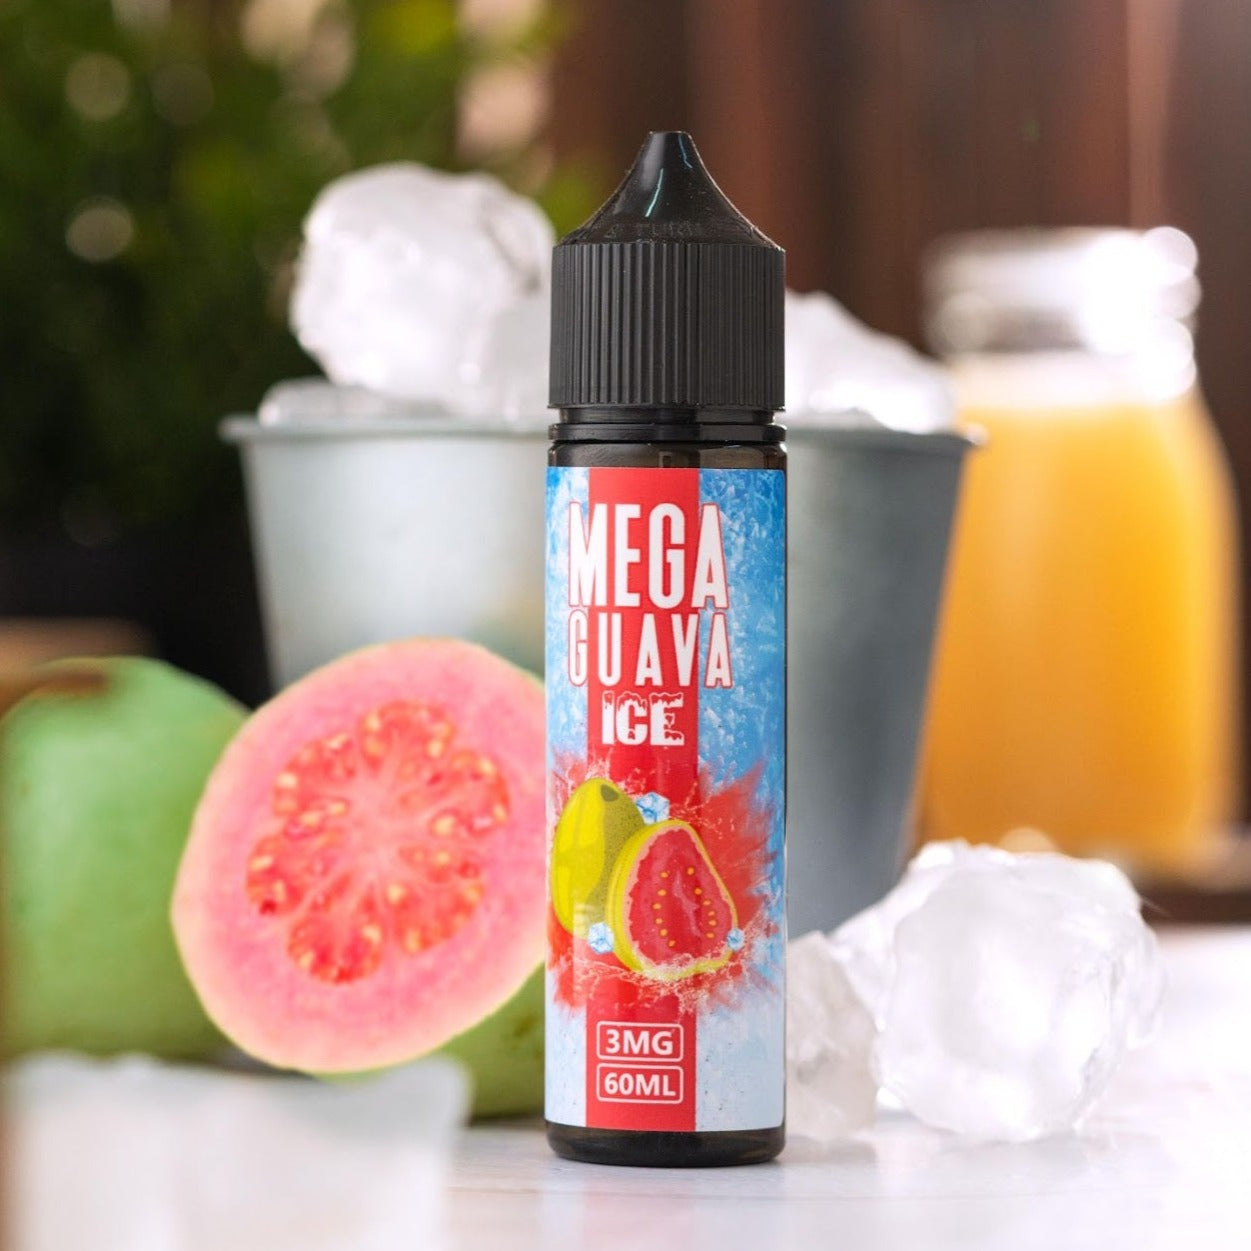 Mega Guava Ice e-liquid by GRAND - A tropical blend of guava sweetness with a refreshing icy twist for an exotic vaping experience